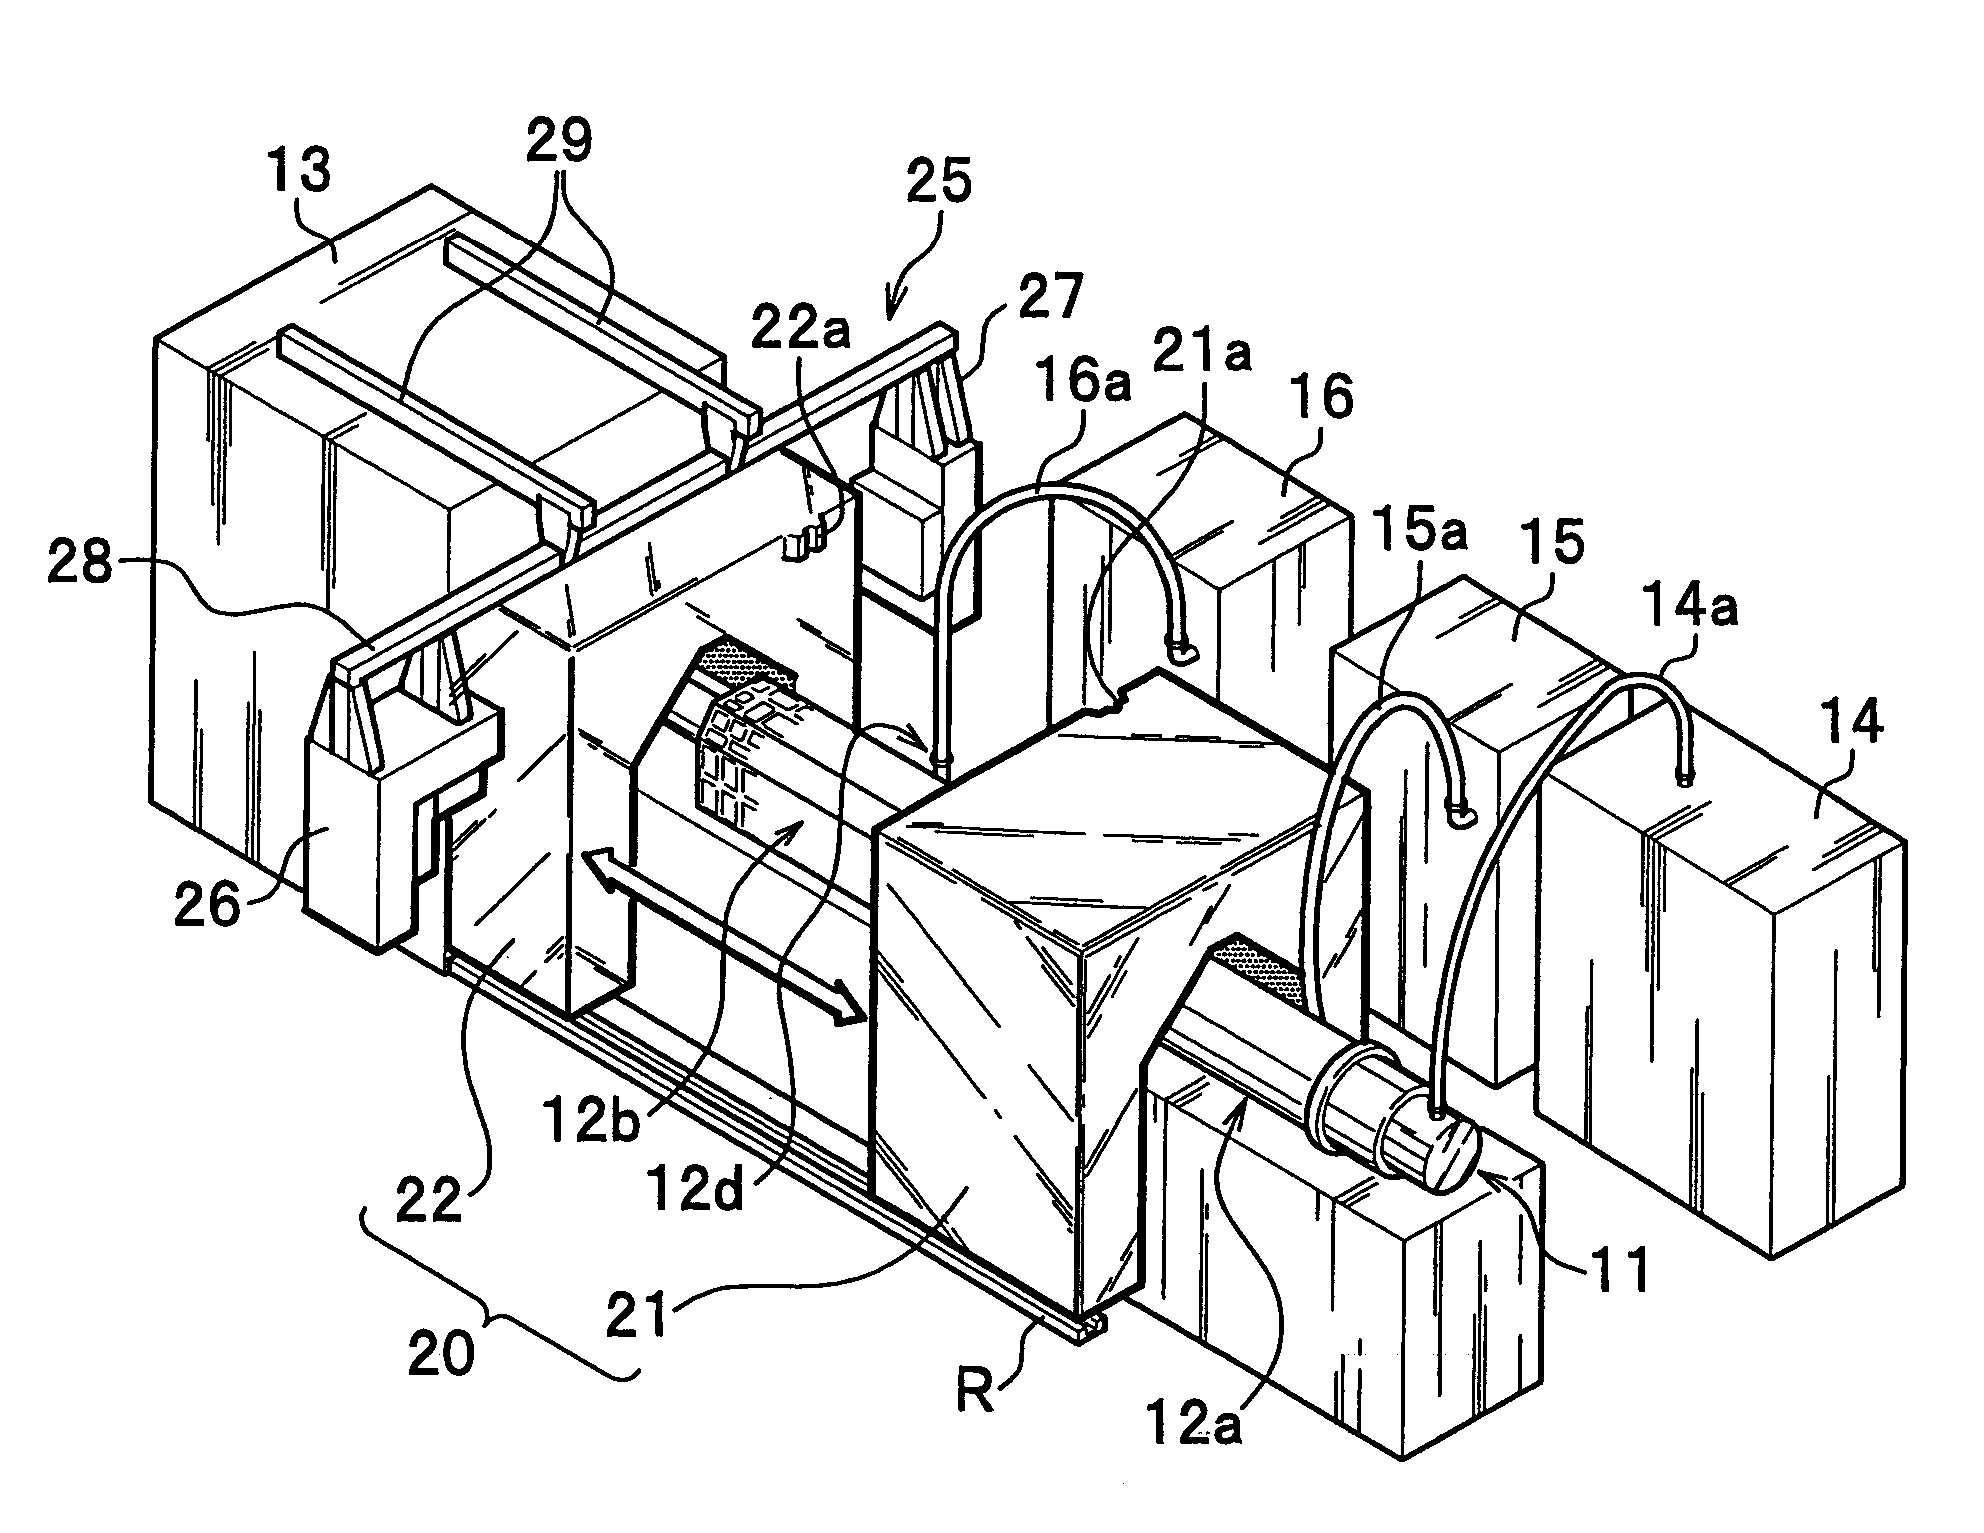 Radioisotope production apparatus and radiopharmaceutical production apparatus